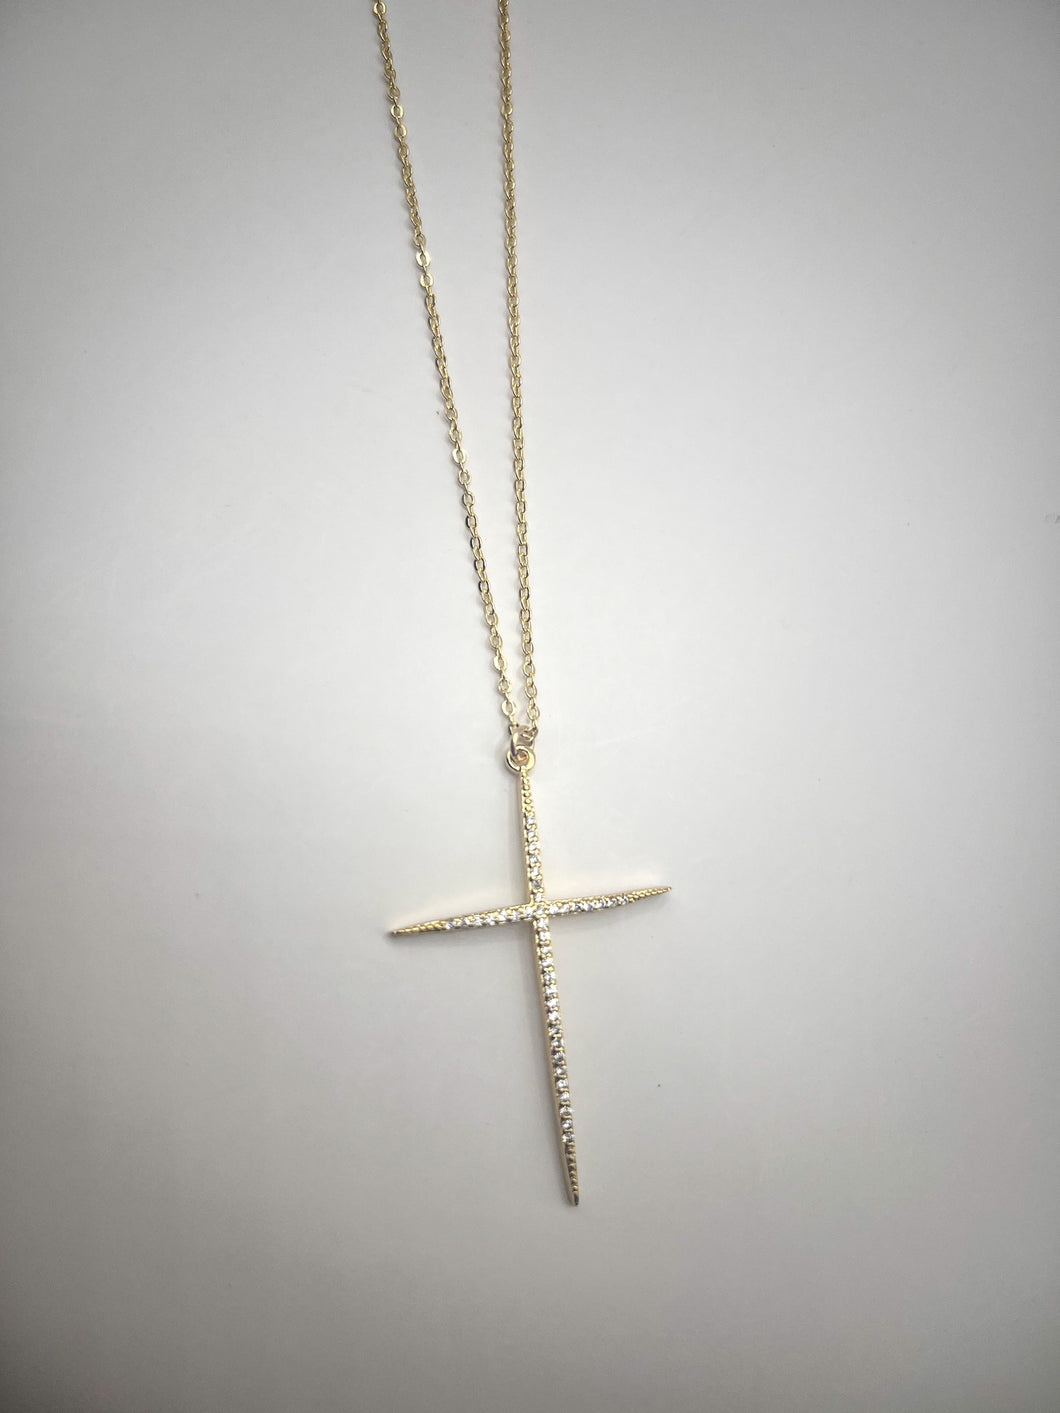 CZ Cross Necklace - Gold Filled